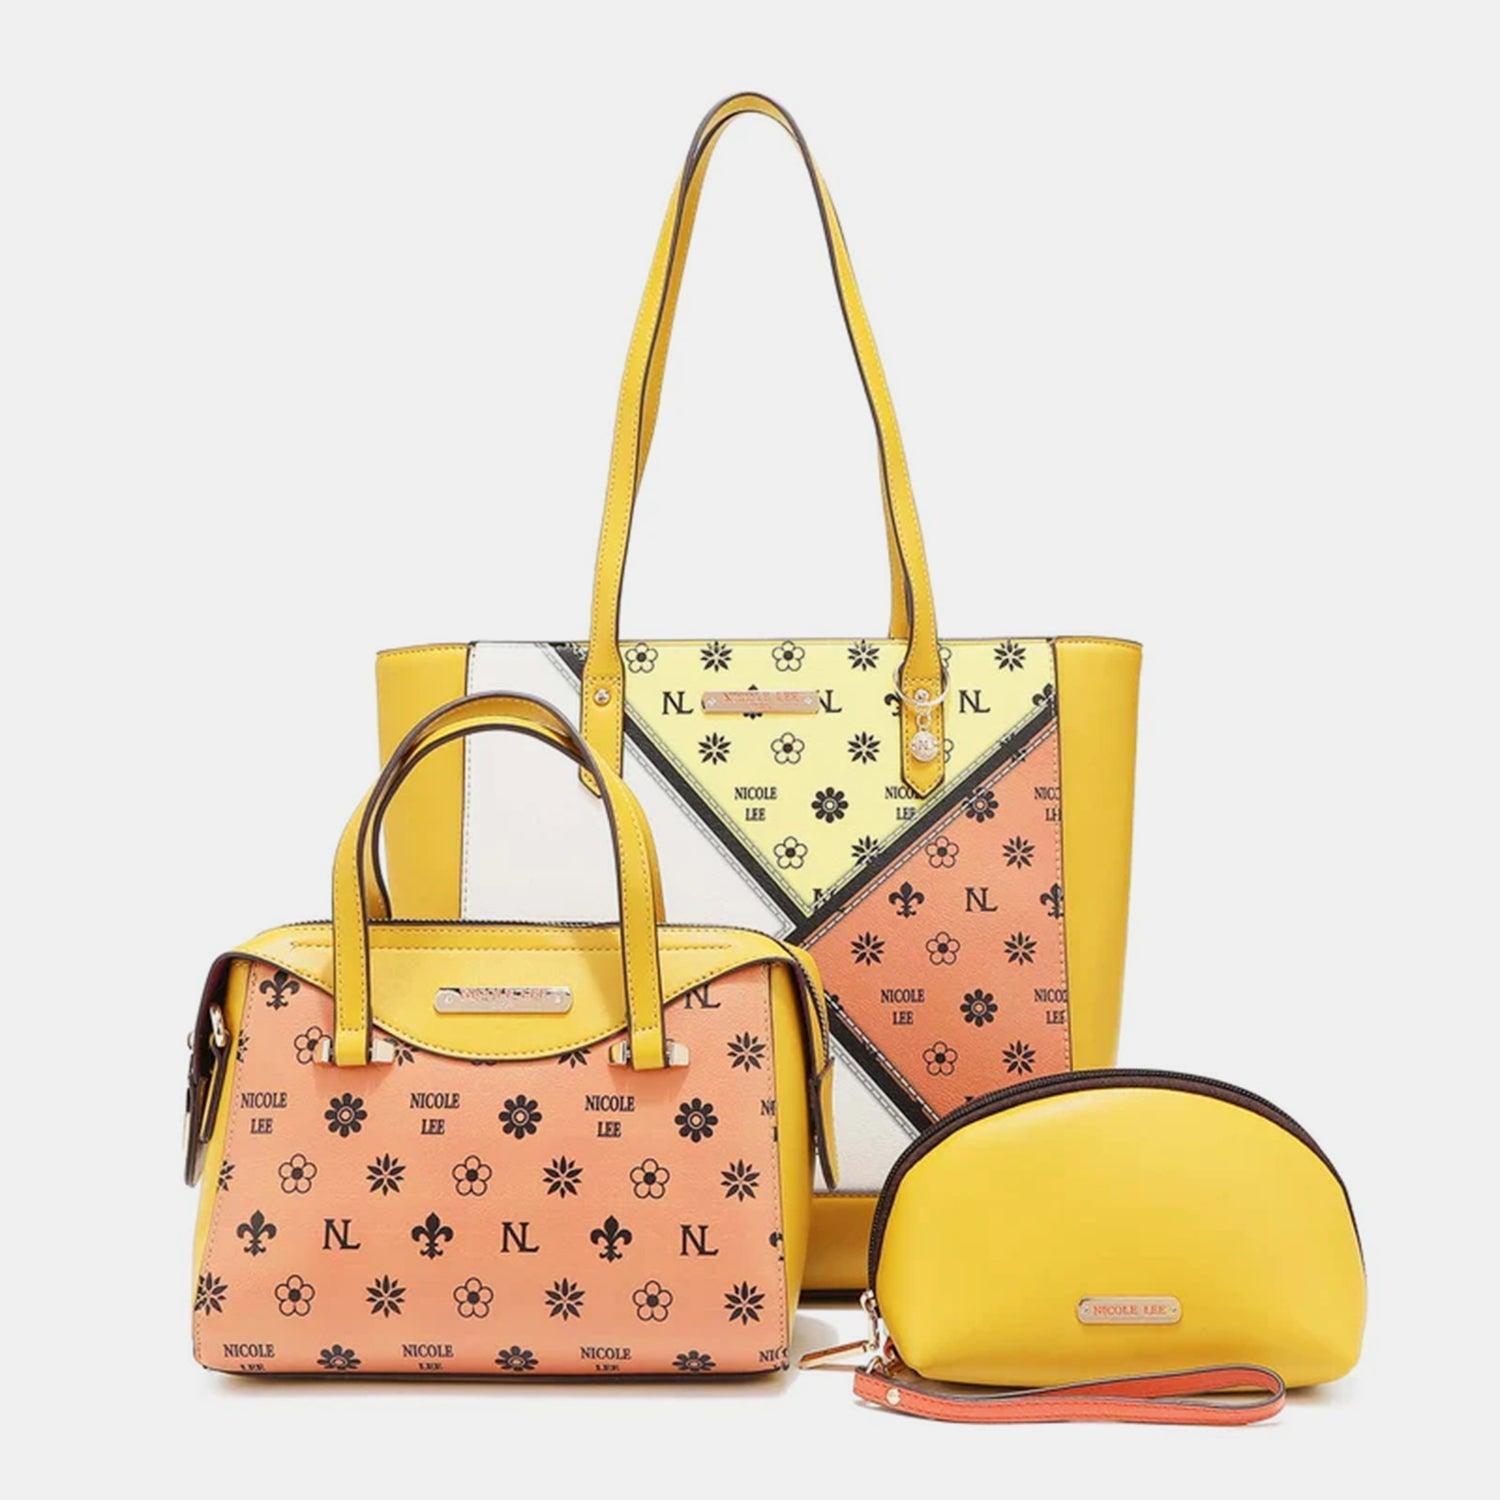 three pieces of handbags and a purse on a white background